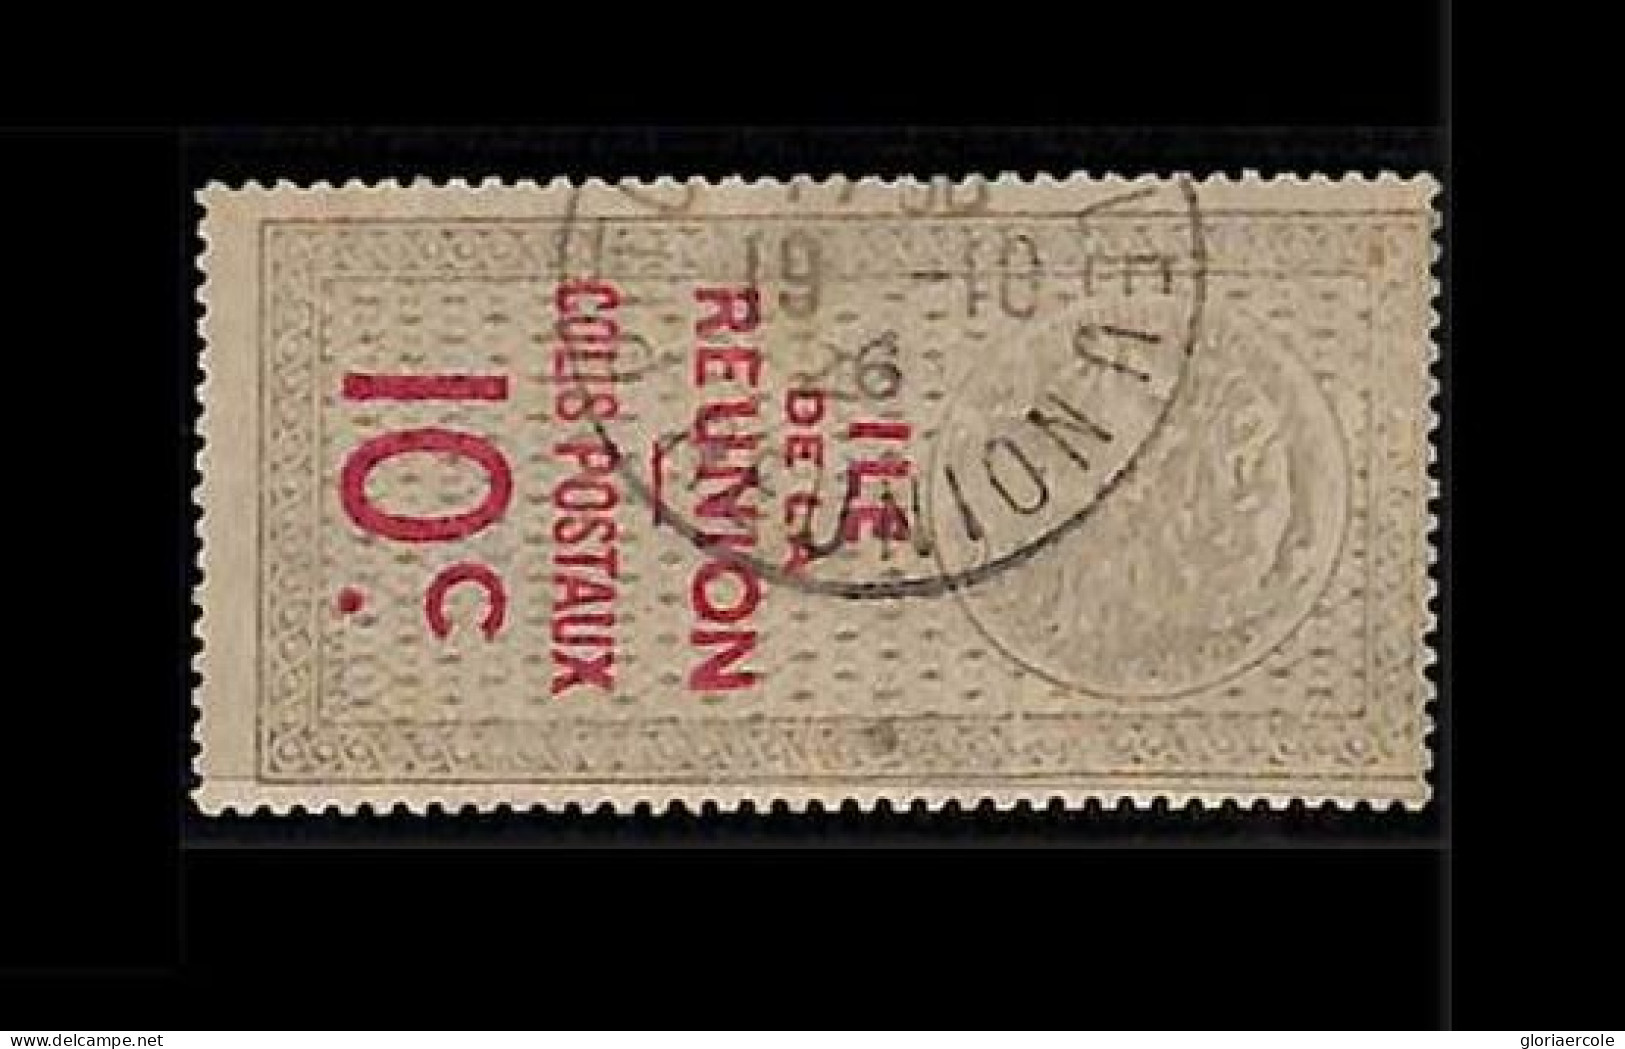 ZA0060f - REUNION -  STAMP - Yvert # 10 CP Colis Postaux PARCEL POST Fine USED - Used Stamps